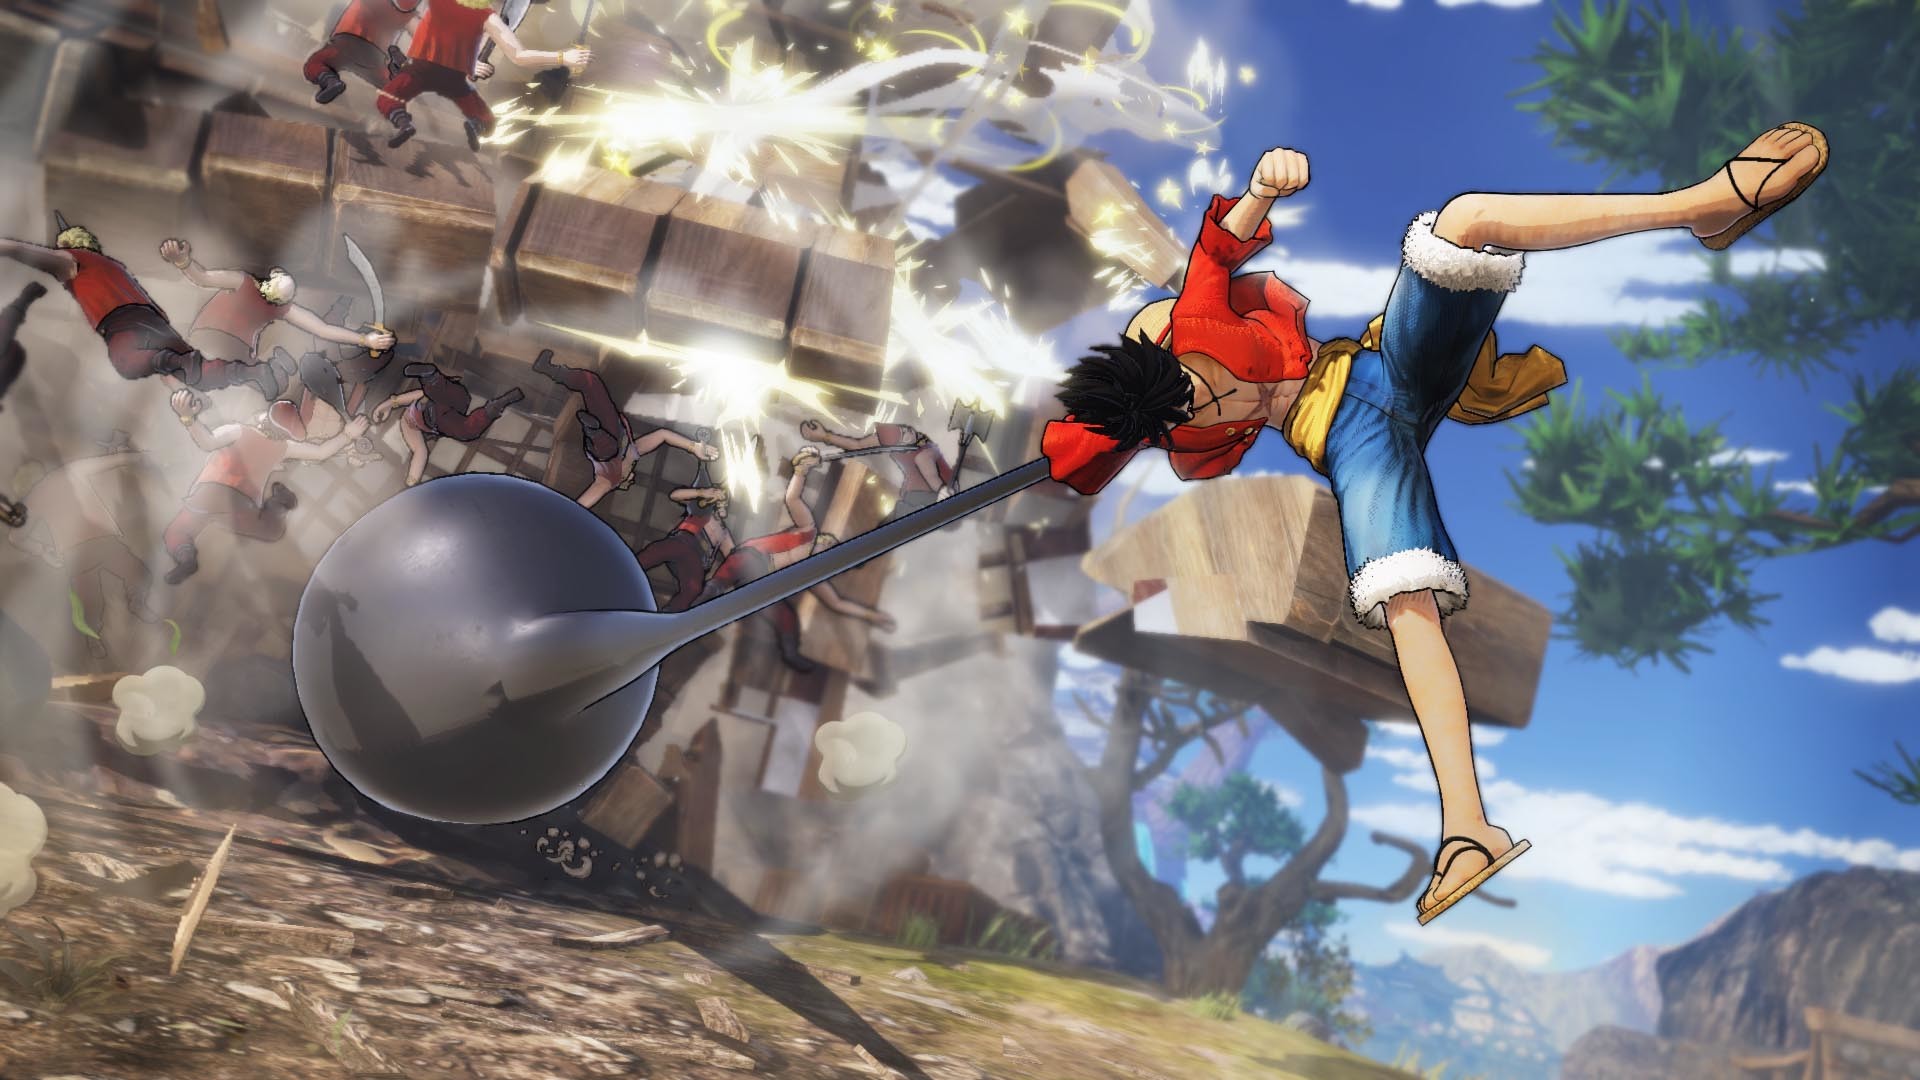 One Piece New World Free Release Date !, Upcoming One Piece Game